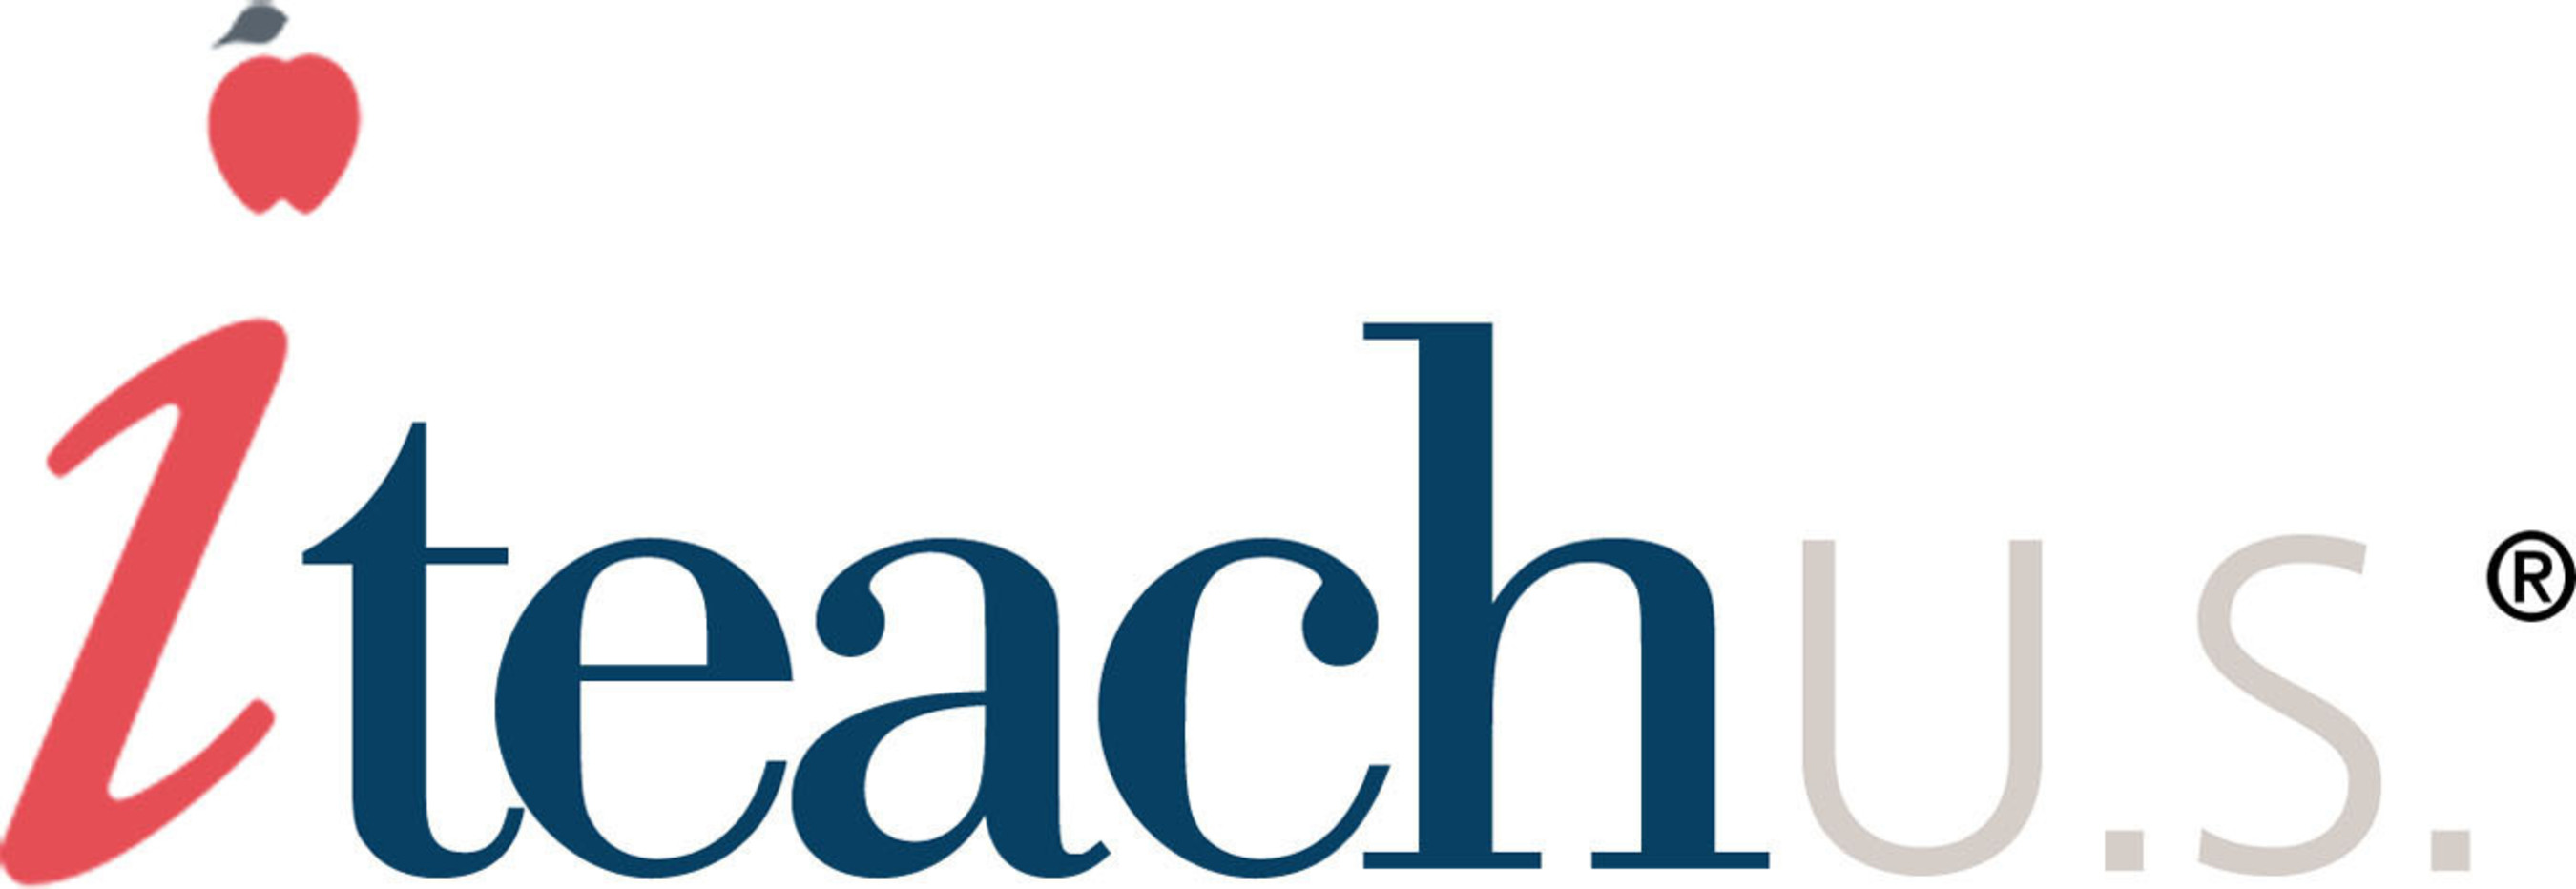 iteachU.S. is an educator preparation program that combines online learning with face-to-face classroom supervision. (PRNewsFoto/iteachU.S.) (PRNewsFoto/ITEACHU.S.)